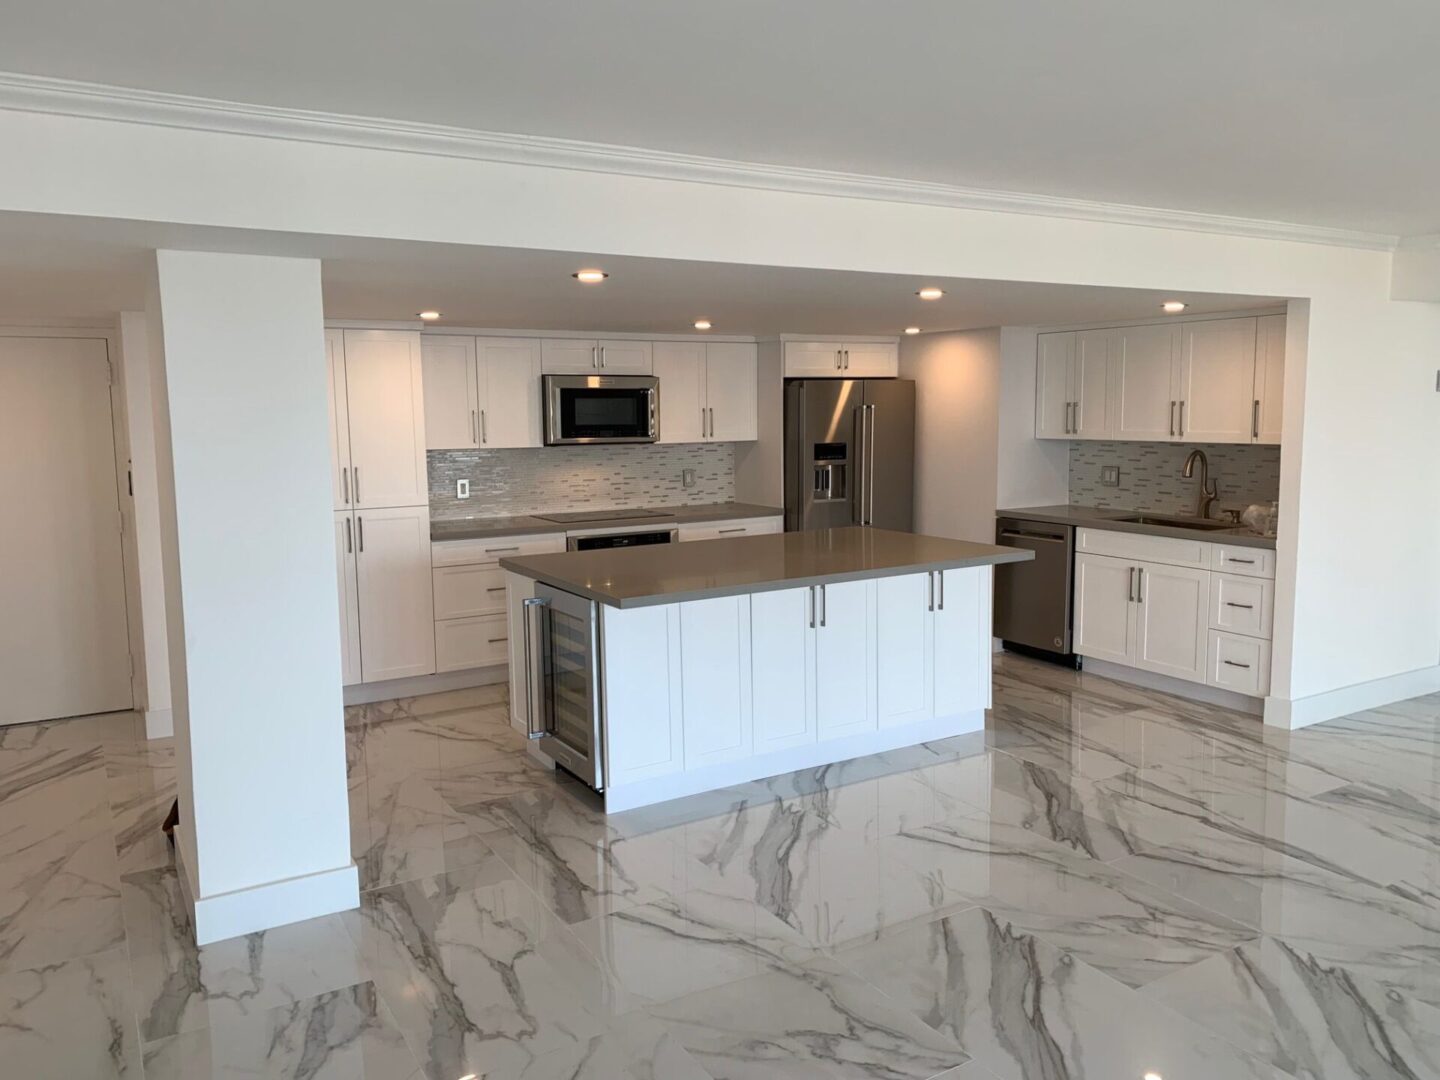 A kitchen with white cabinets and marble floors.